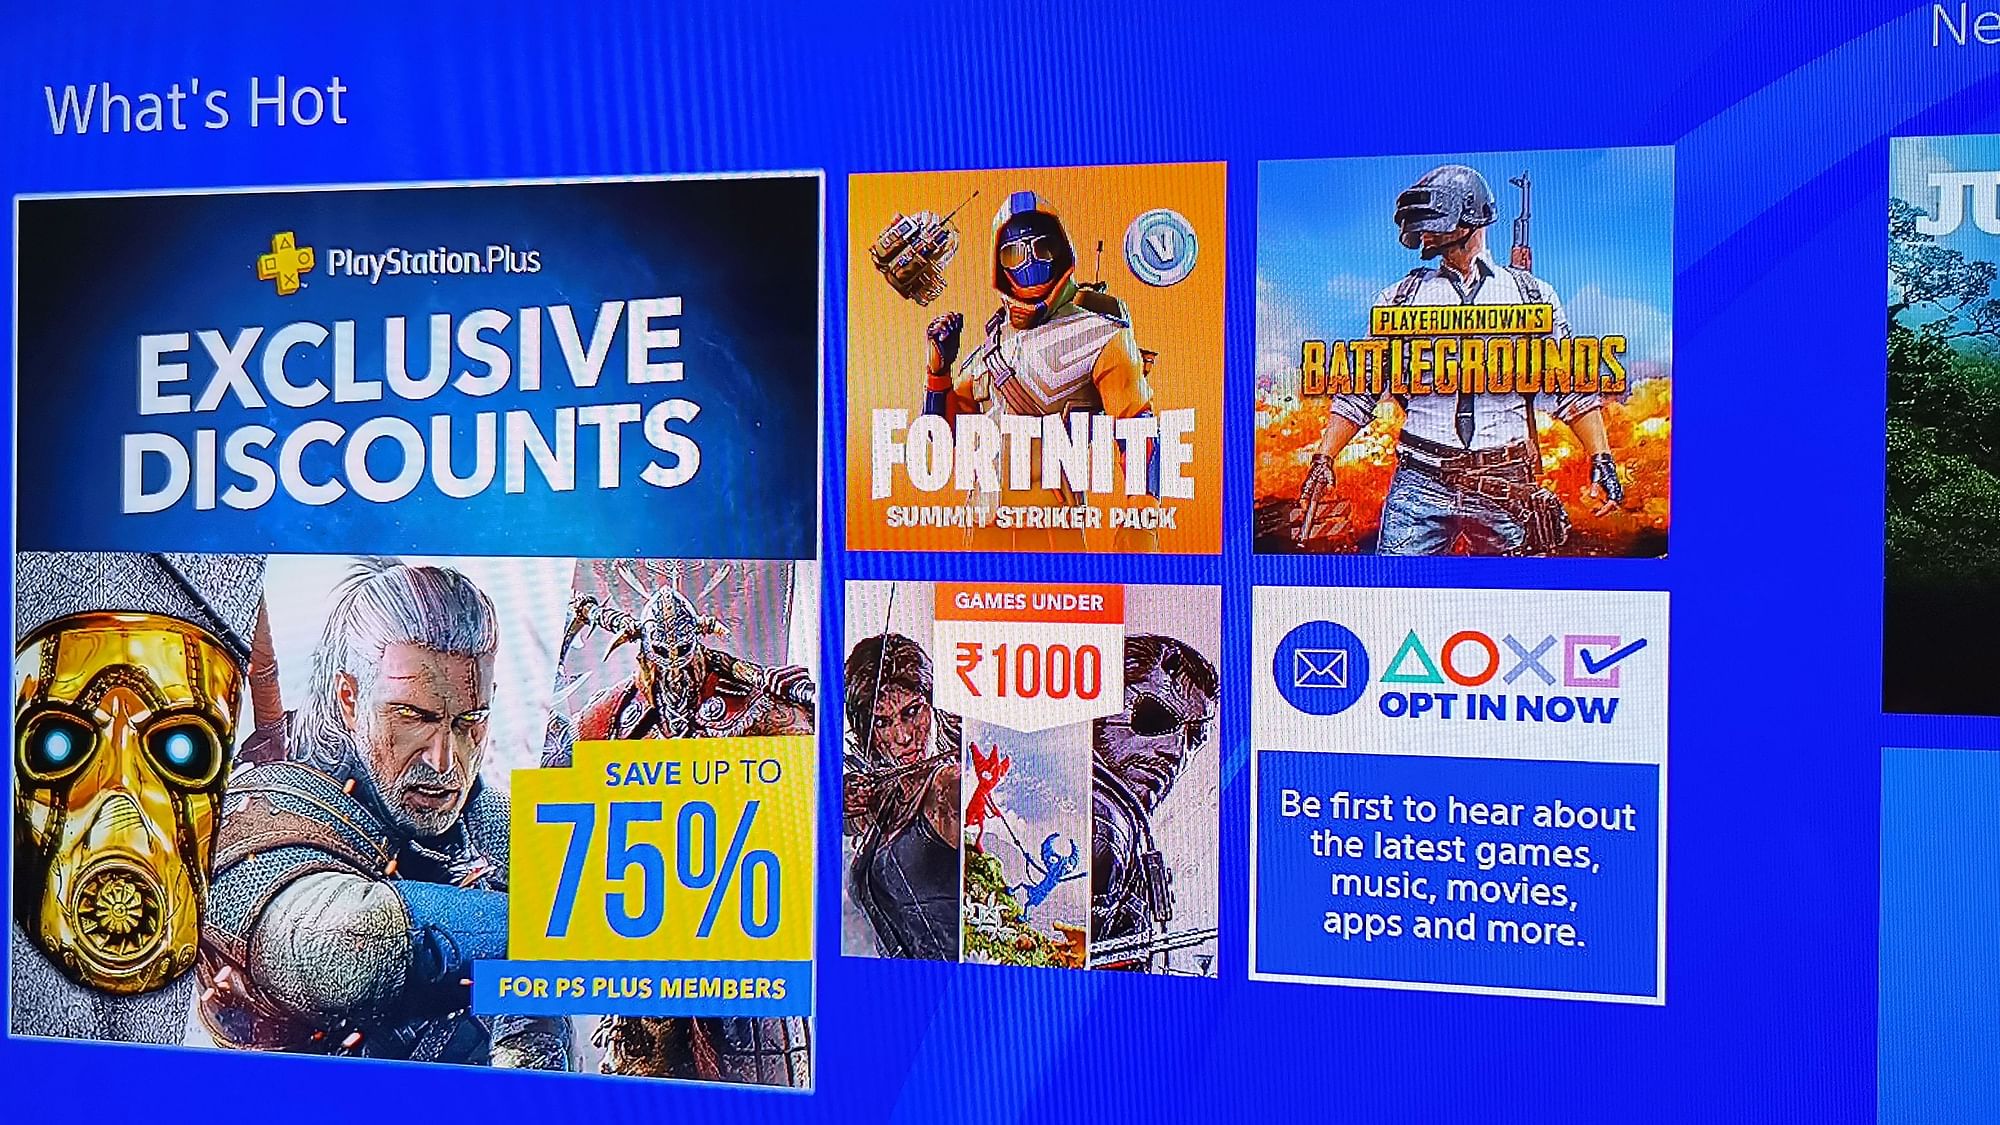 PUBG is available on PS4.